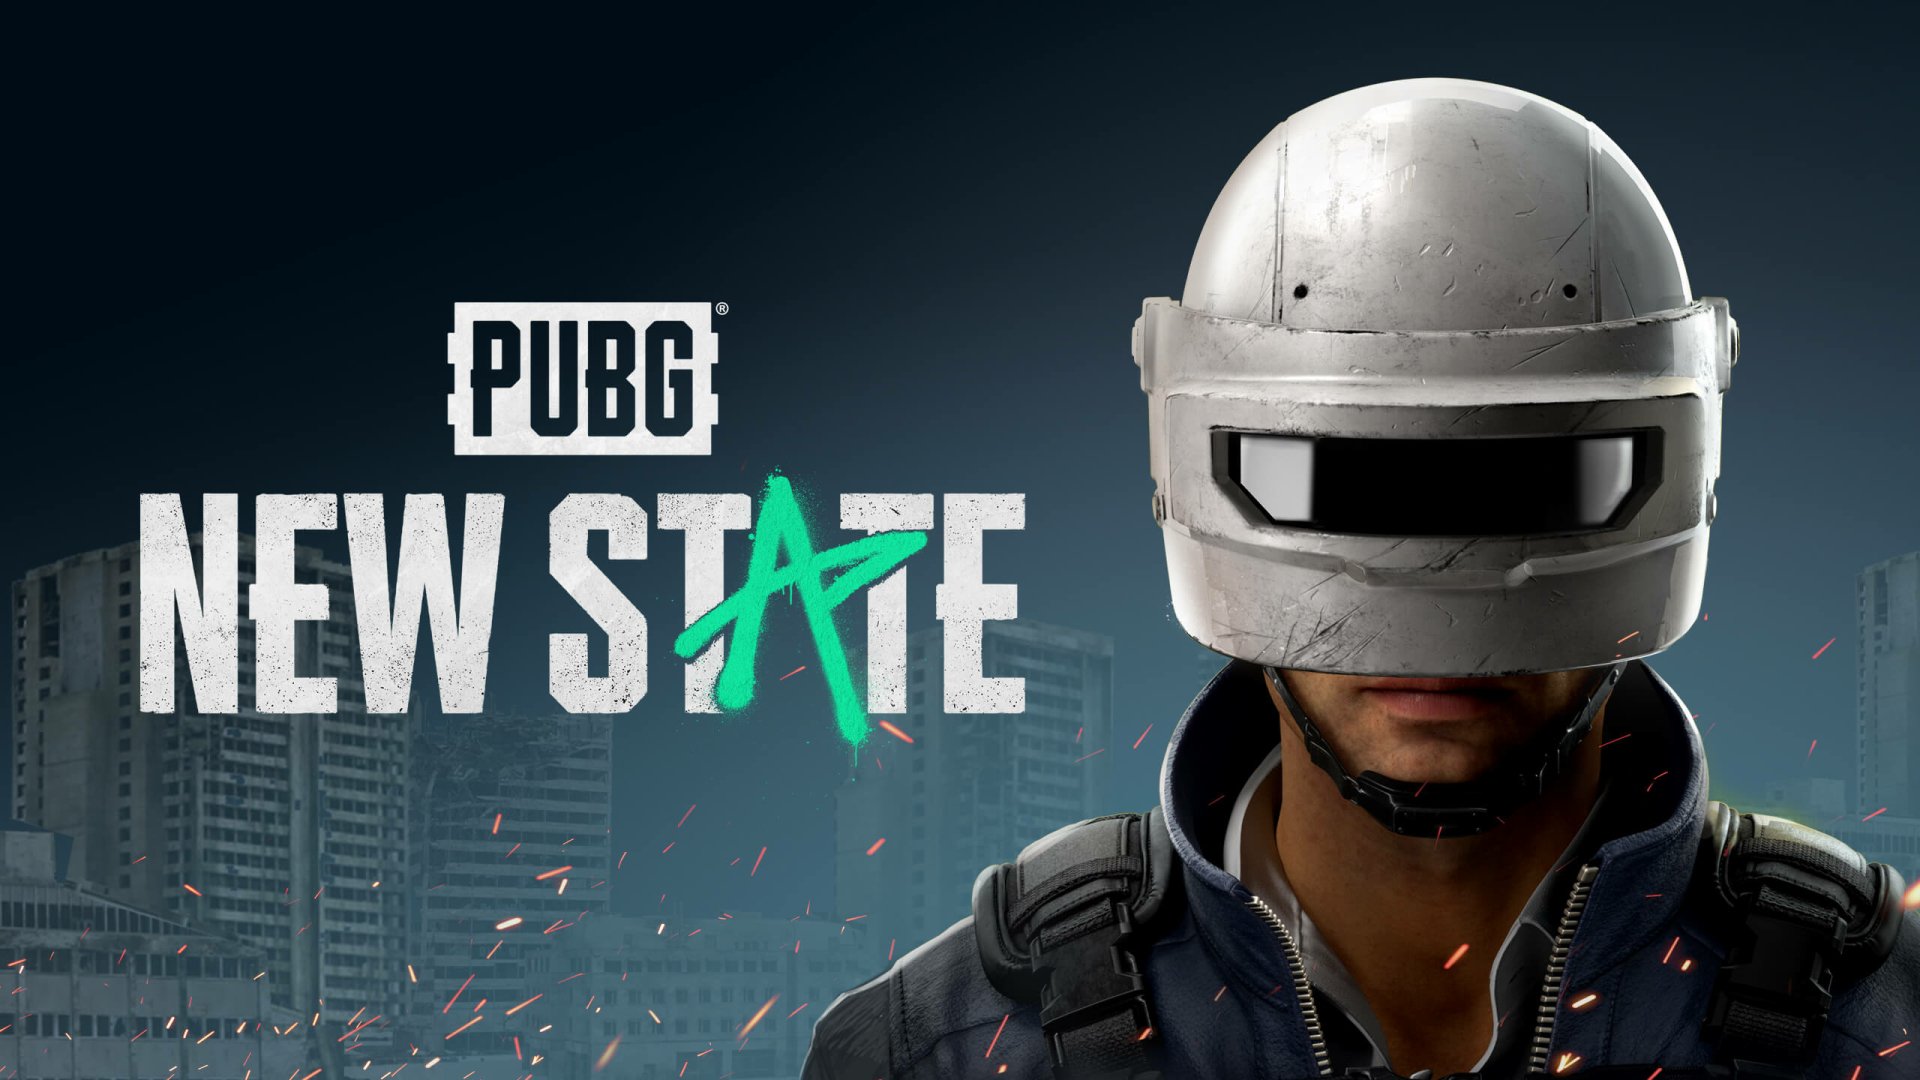  PUBG NEW STATE HD Wallpaper Background Image 2560x1440